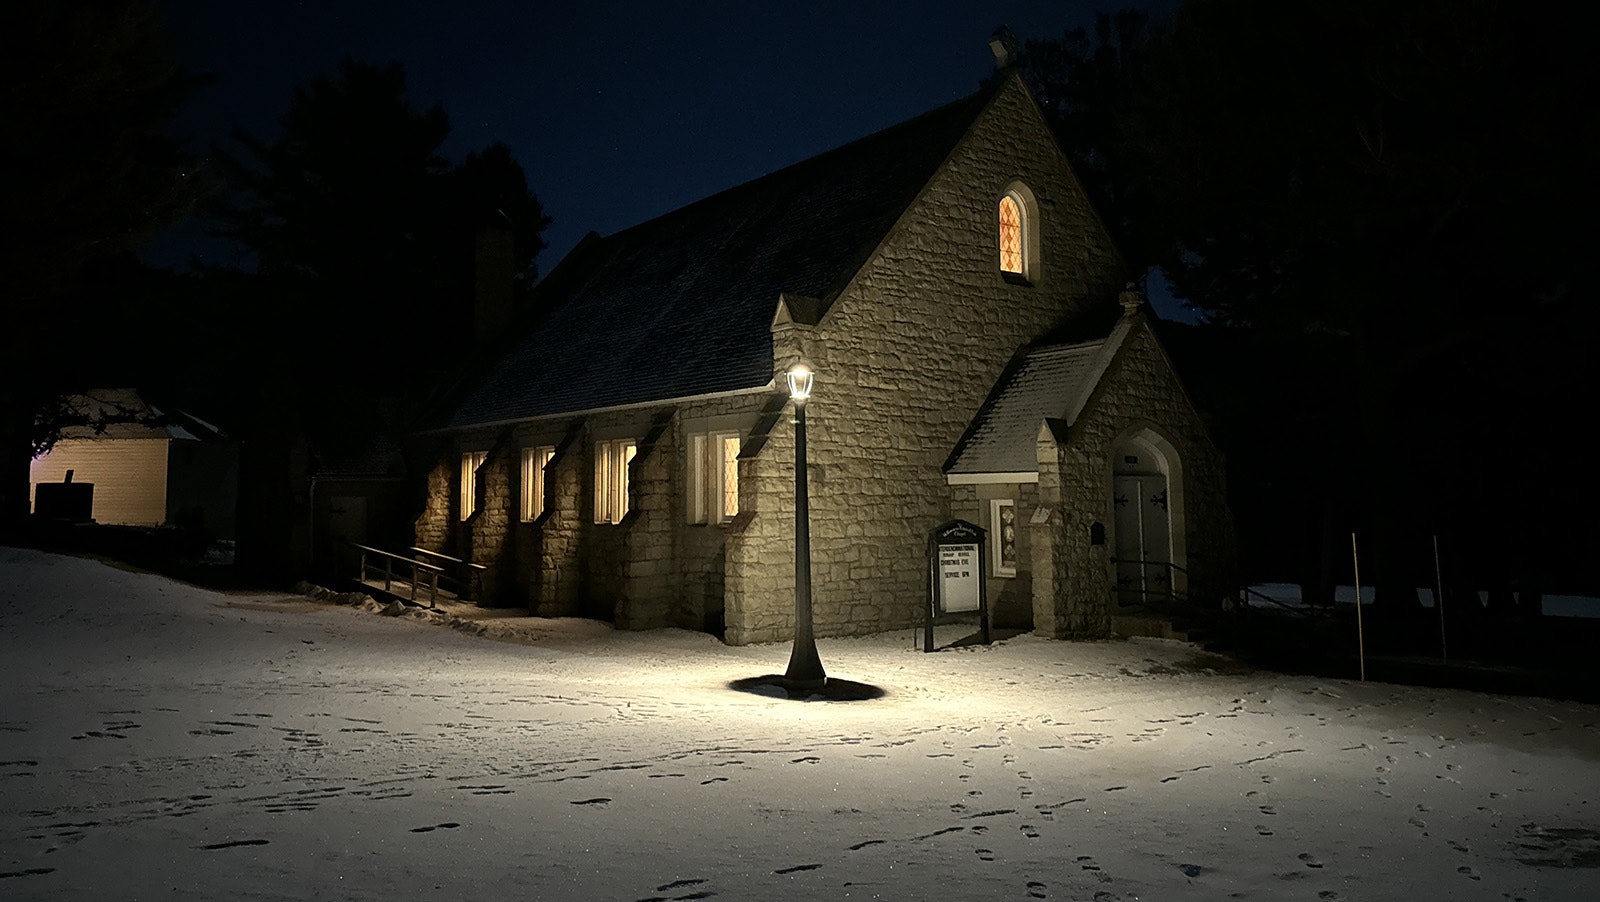 It was a peaceful scene outside the Mammoth Hot Springs Chapel on Christmas Eve.